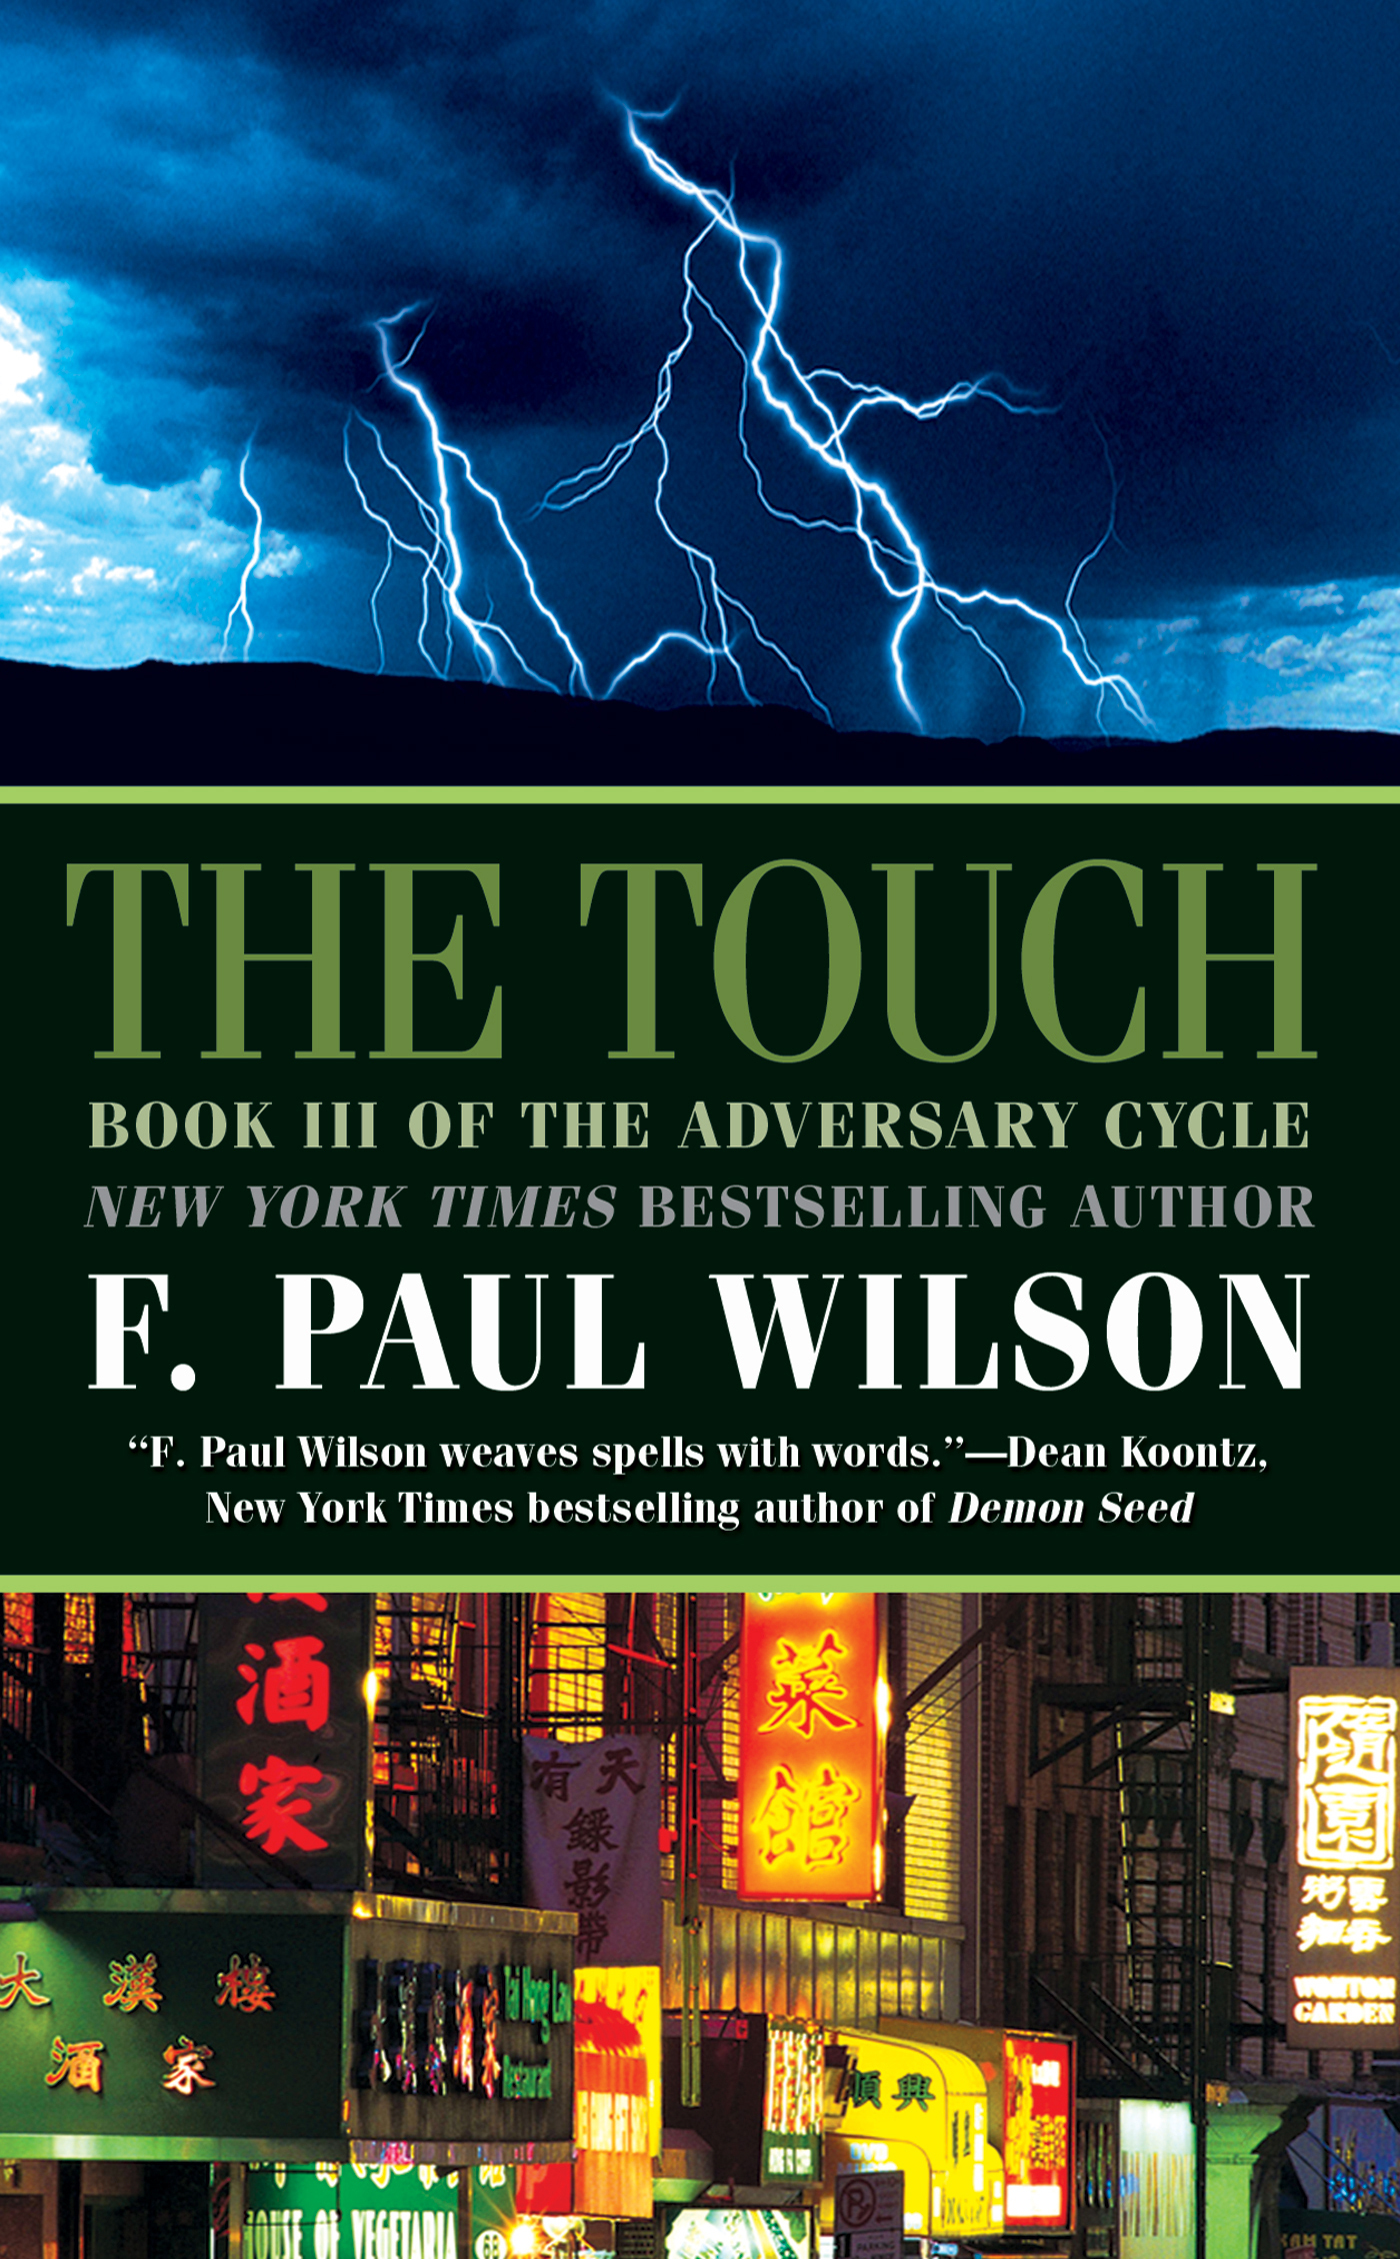 The Touch : Book III of the Adversary Cycle by F. Paul Wilson